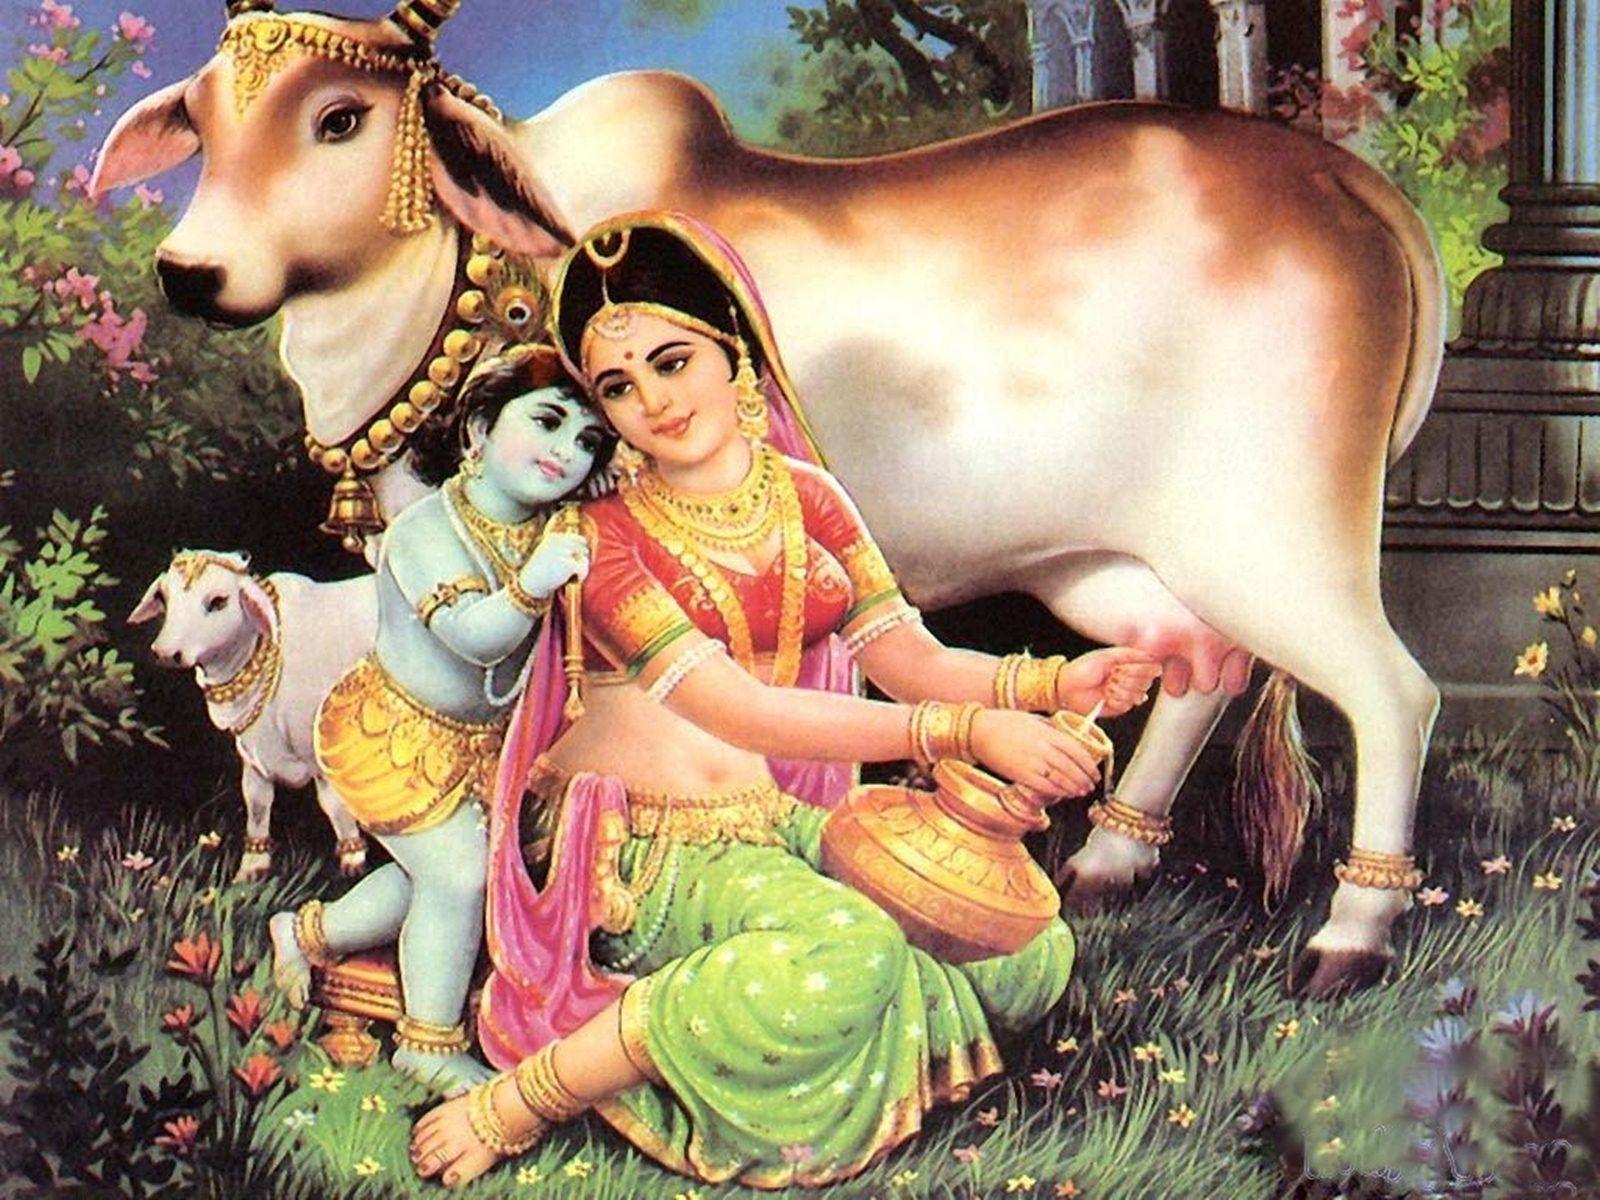  Baby Child Lord Krishna Images With Cow  MyGodImages